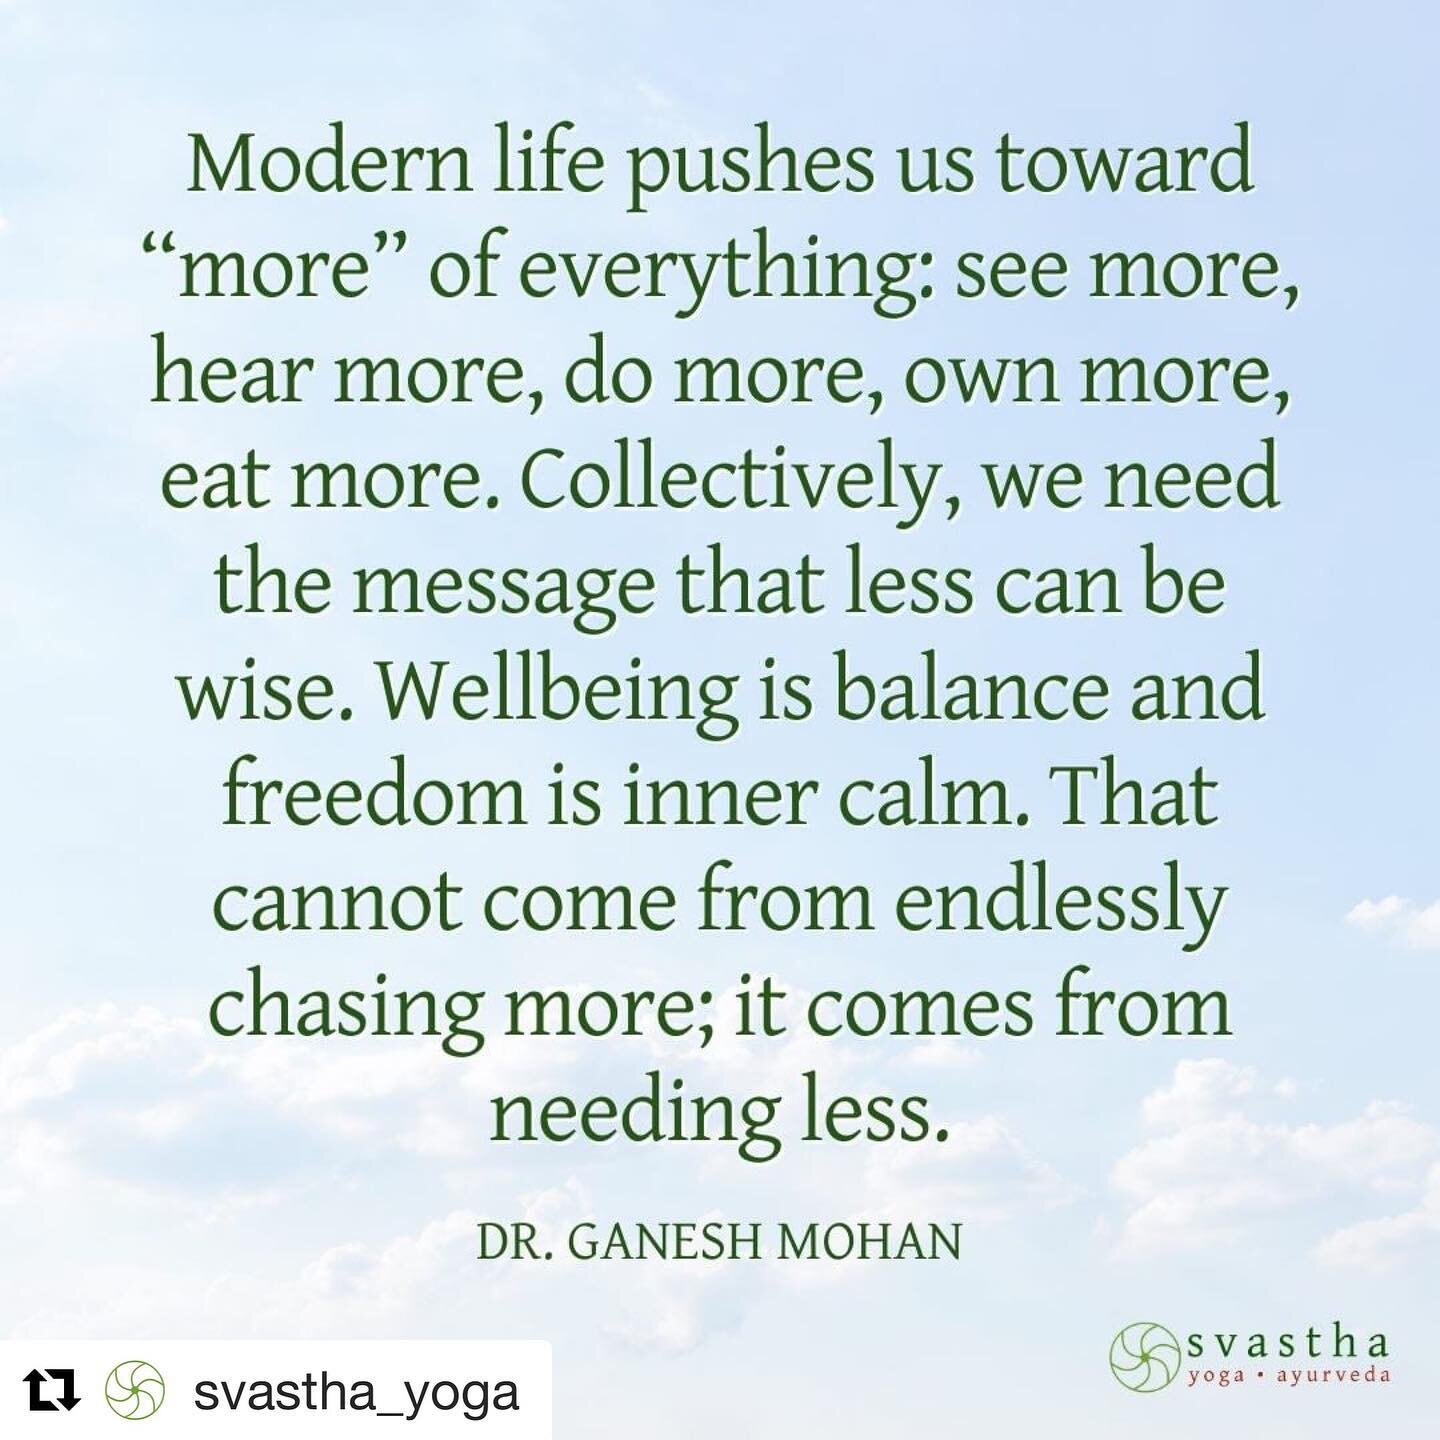 So true ❤️

#Repost @svastha_yoga with @get_repost
・・・
The ancient Kaṭha-Upaniṣad says that the path of j&ntilde;āna-yoga begins with quieting our speech and letting our thoughts subside into our awareness within. The ancient darśana-s of India all h